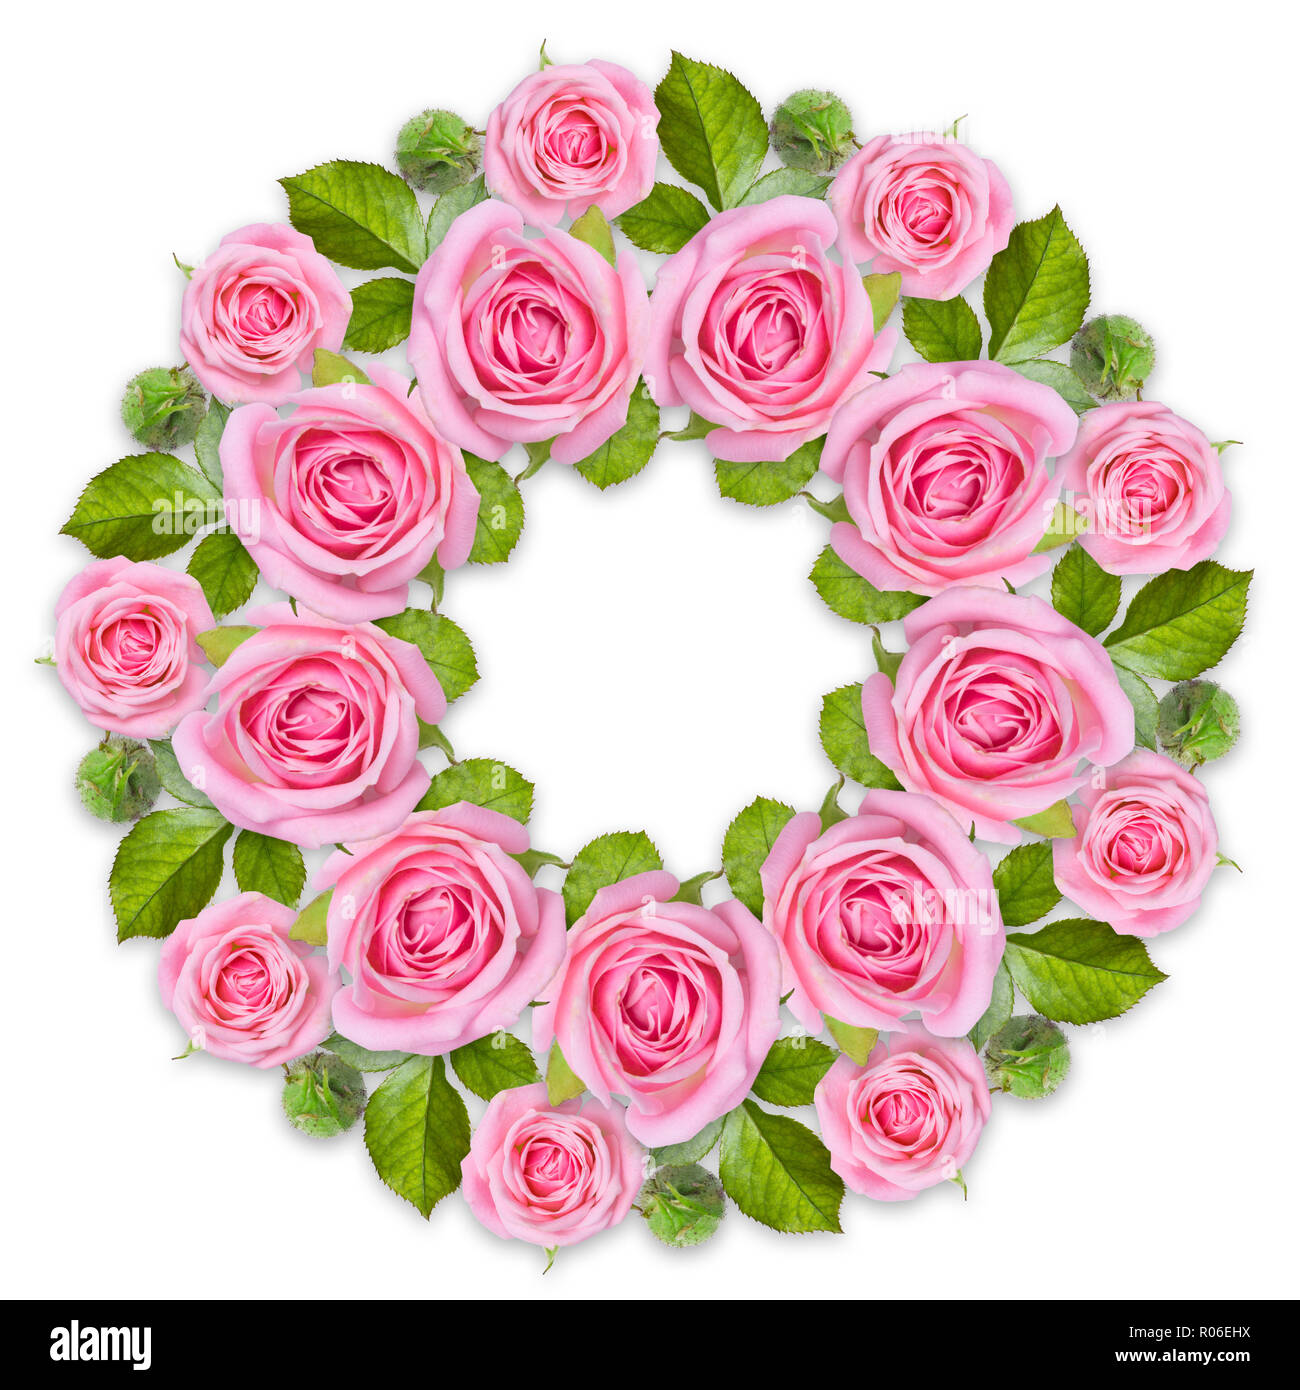 Rond frame Wreath made of pink roses isolated on white background. Gentle circular floral ornament. Flower mandala Stock Photo